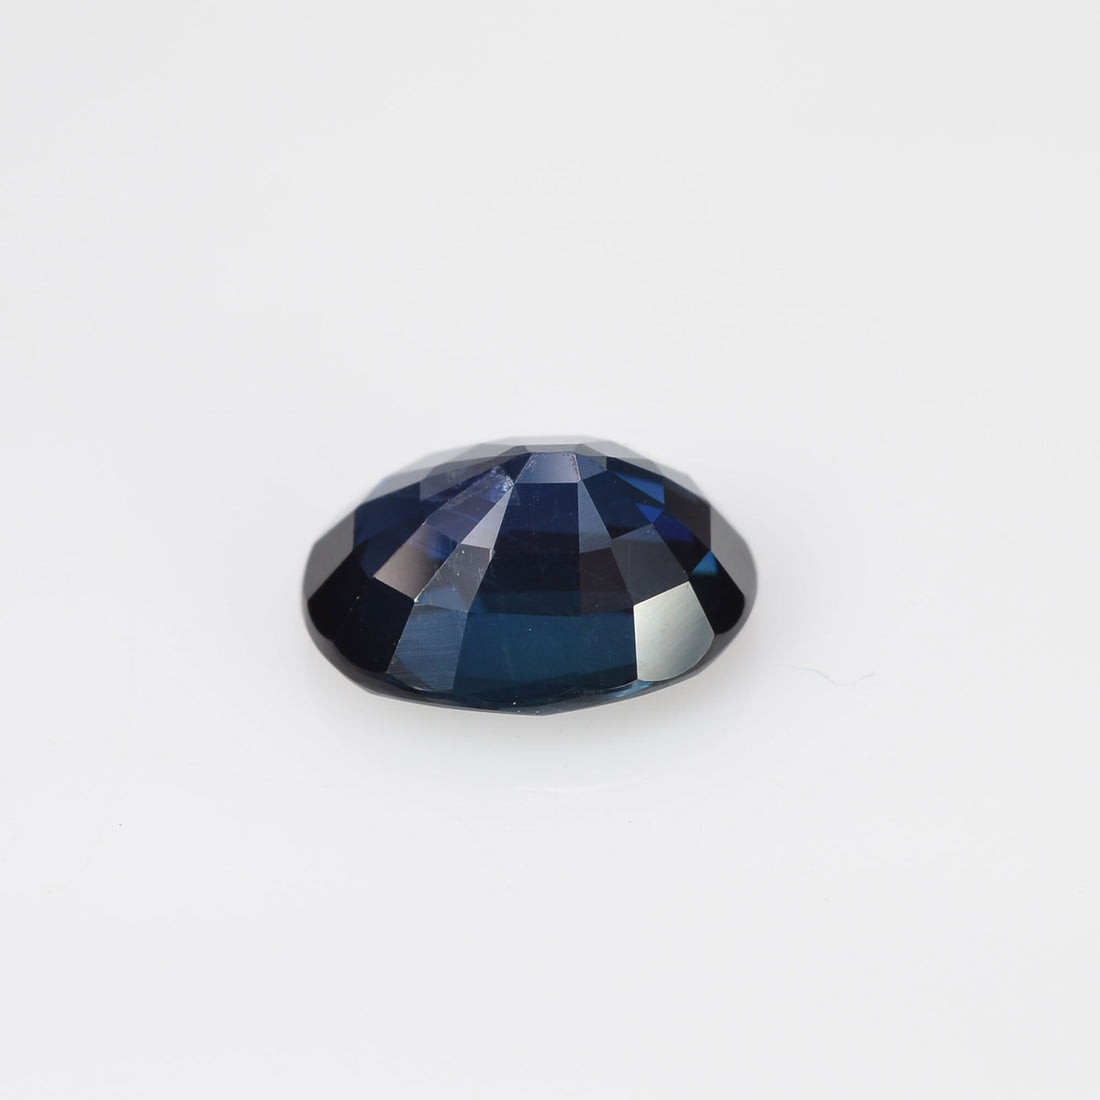 2.51 cts Natural Teal Blue Green Sapphire Loose Gemstone Oval Cut